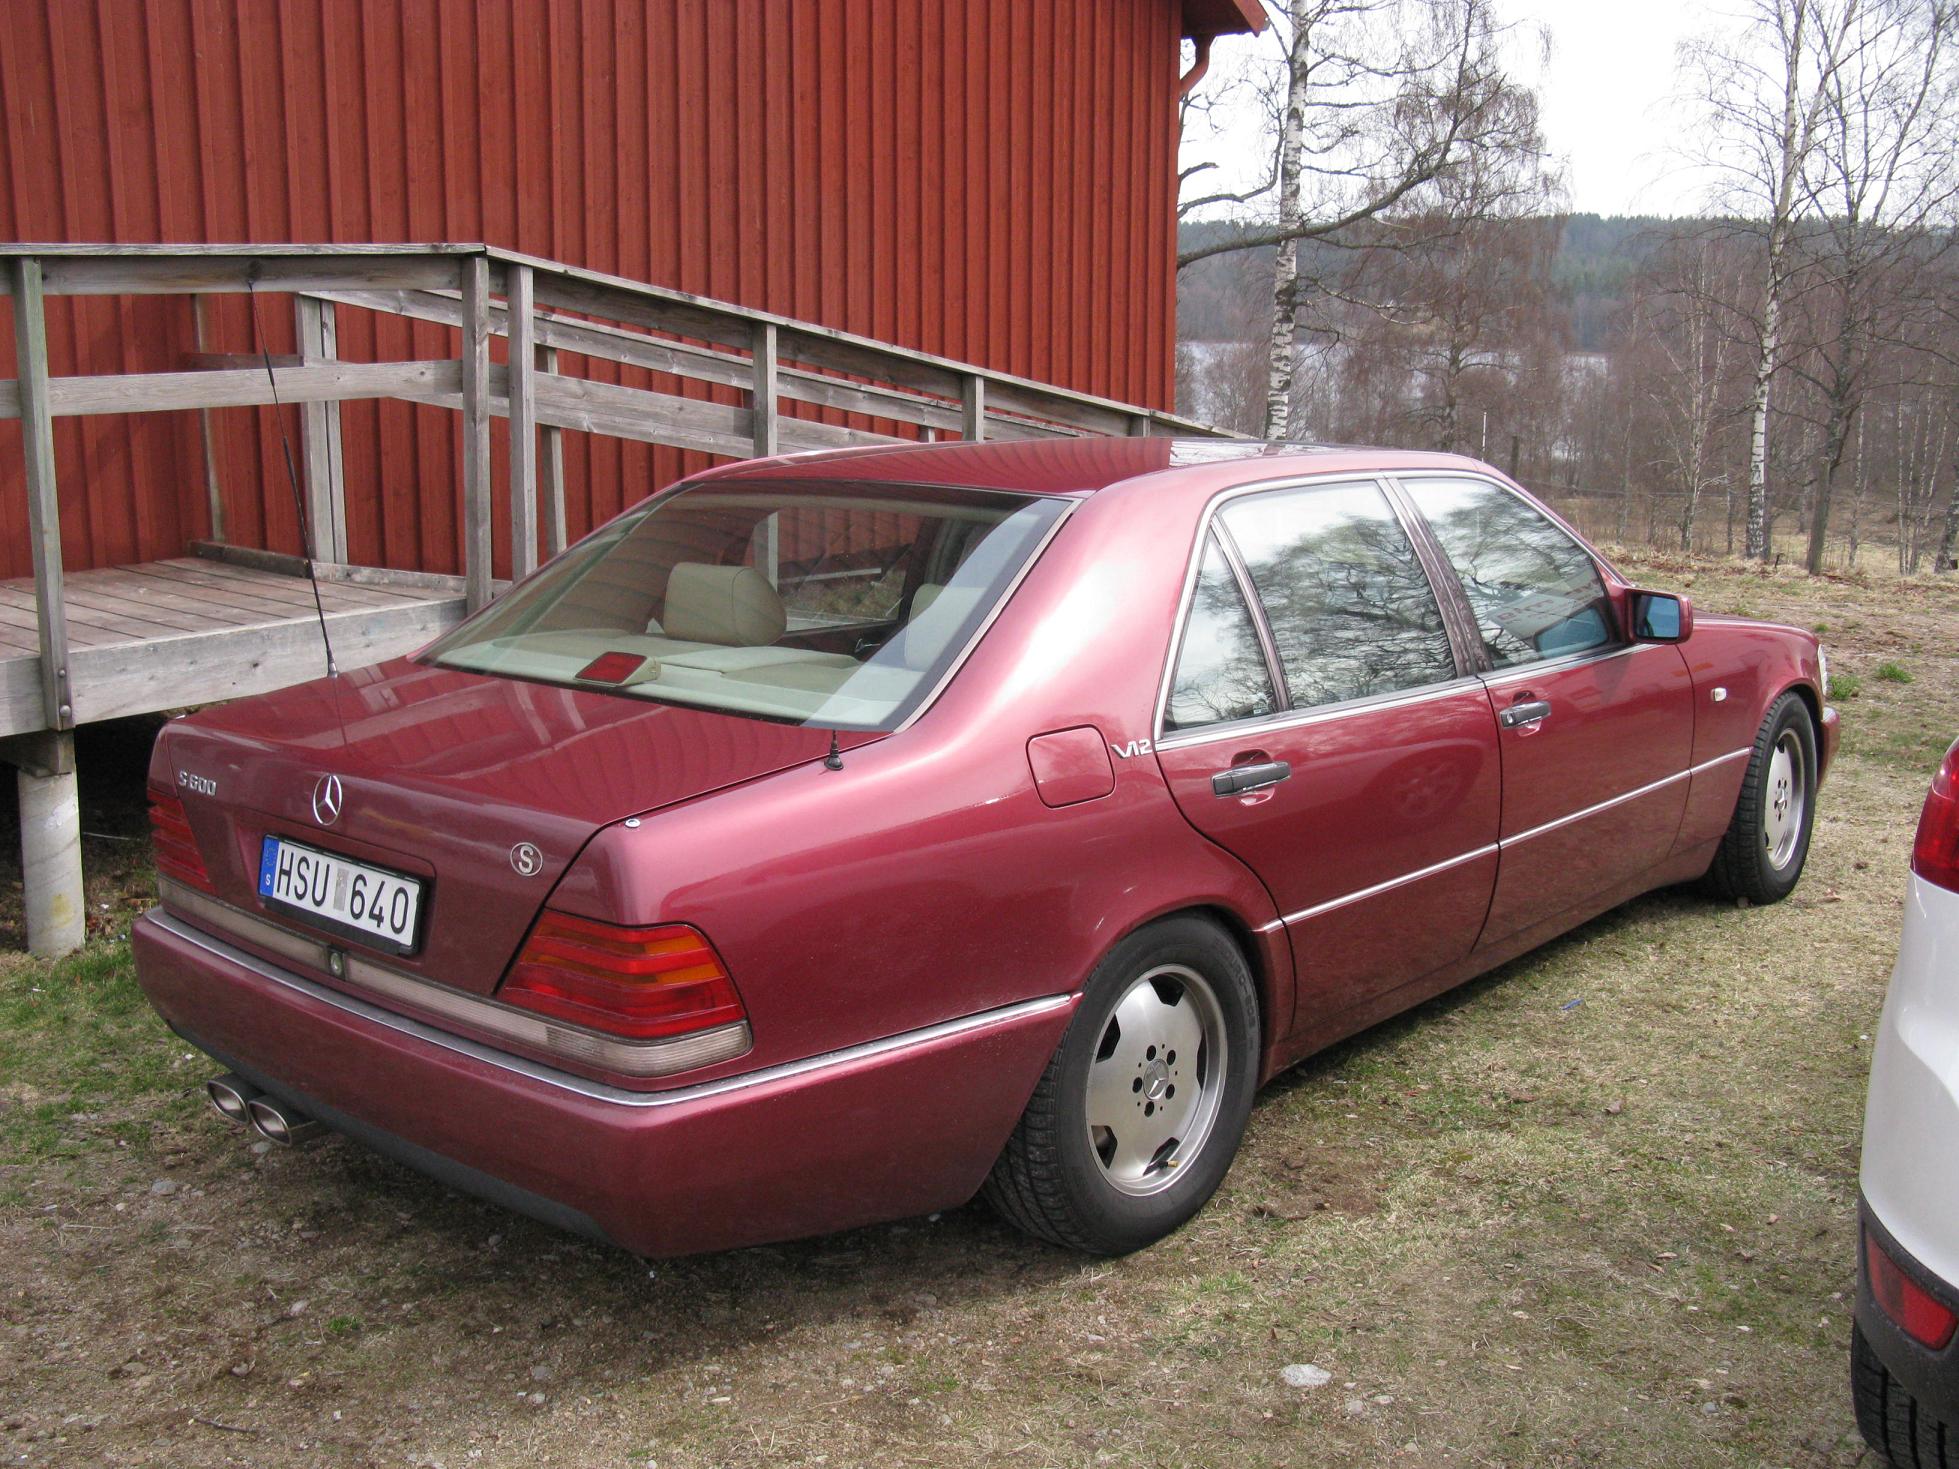 a maroon mercedes cl - type car is parked next to a red barn